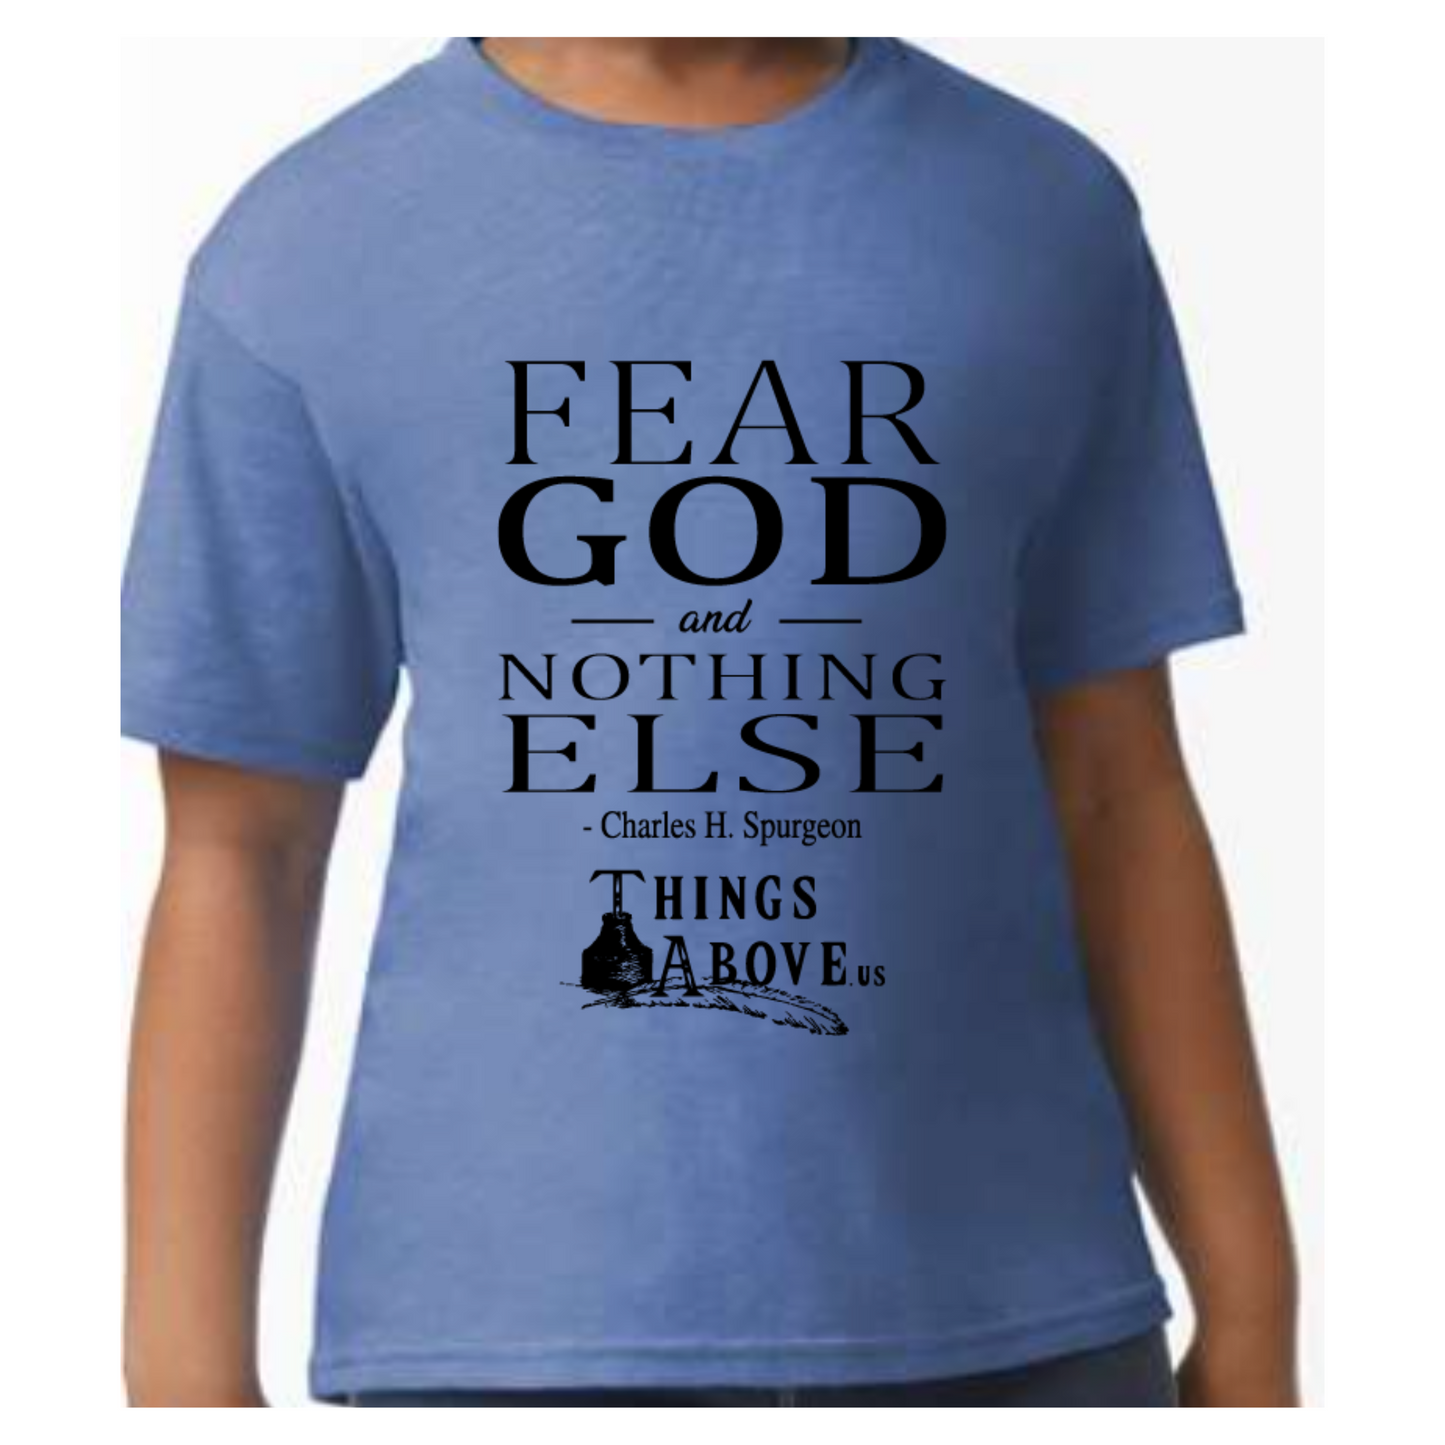 Youth Size - Fear God and Nothing Else Shirt - Things Above Us